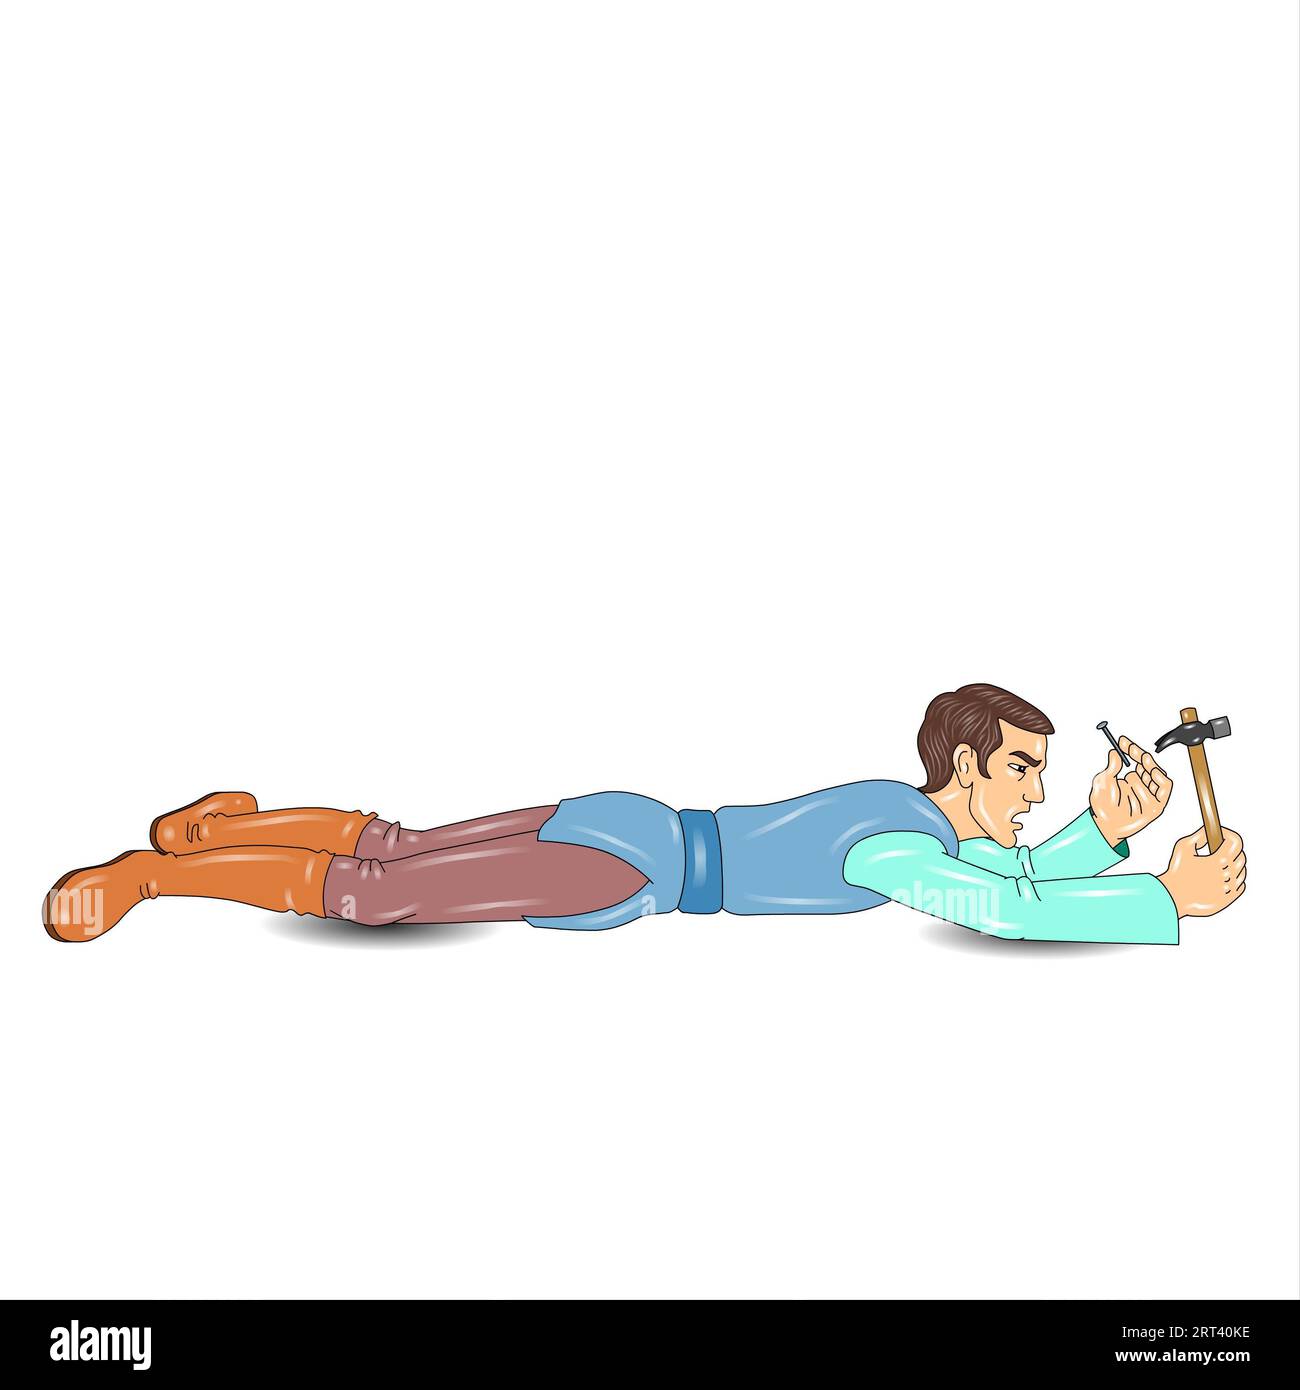 Vector illustration of a man lying on the floor with a hammer. Stock Photo